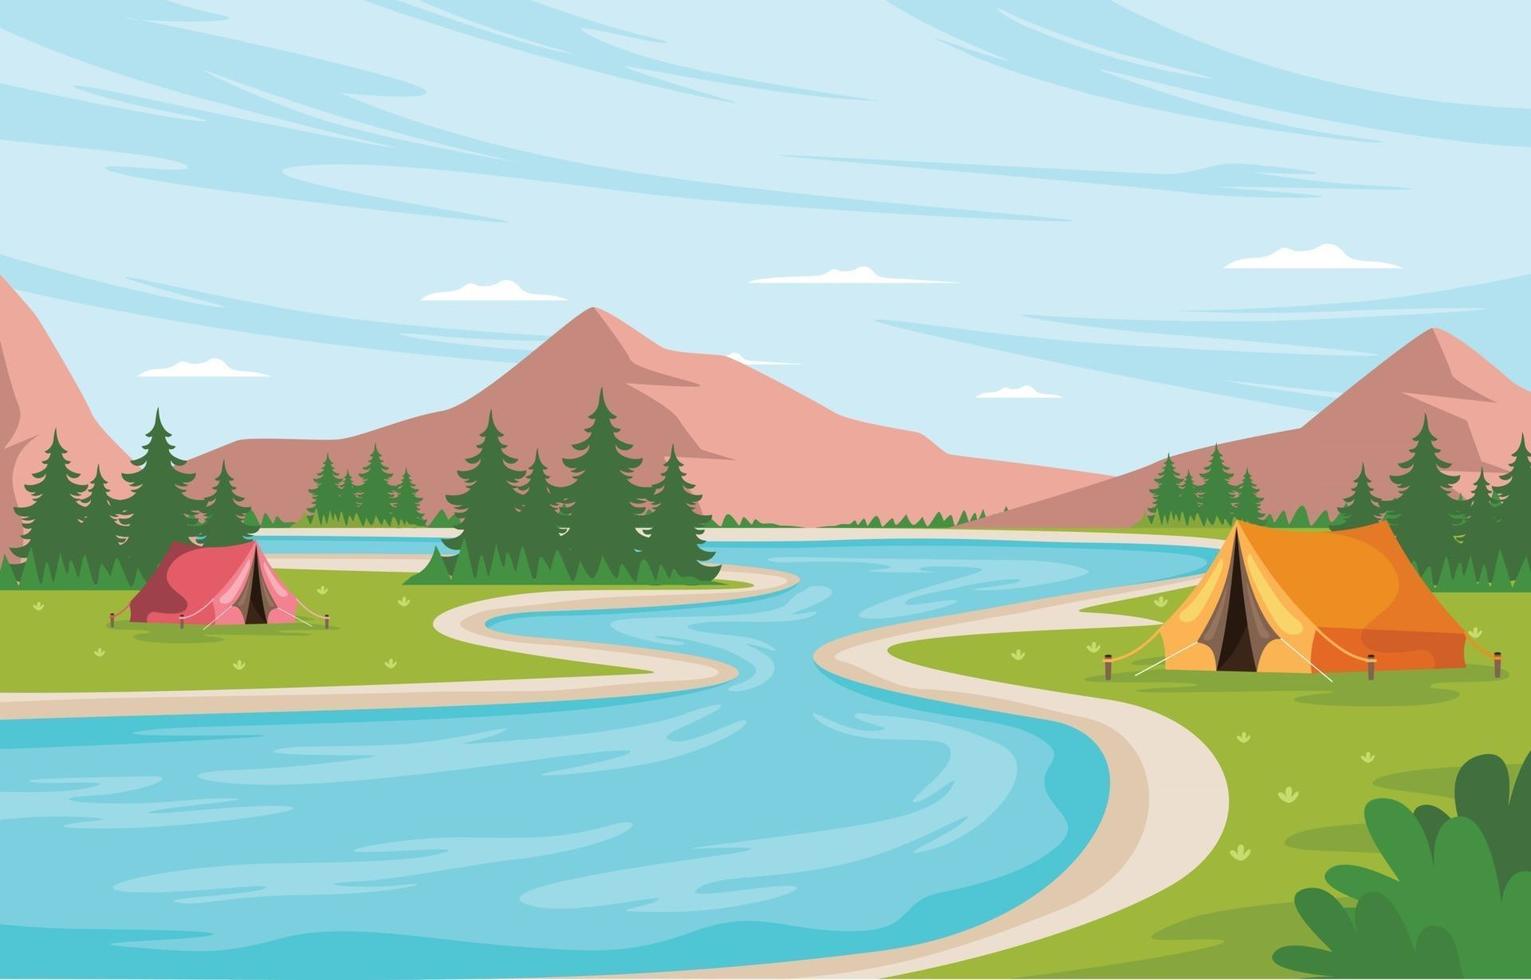 Camp Site By The River Background vector